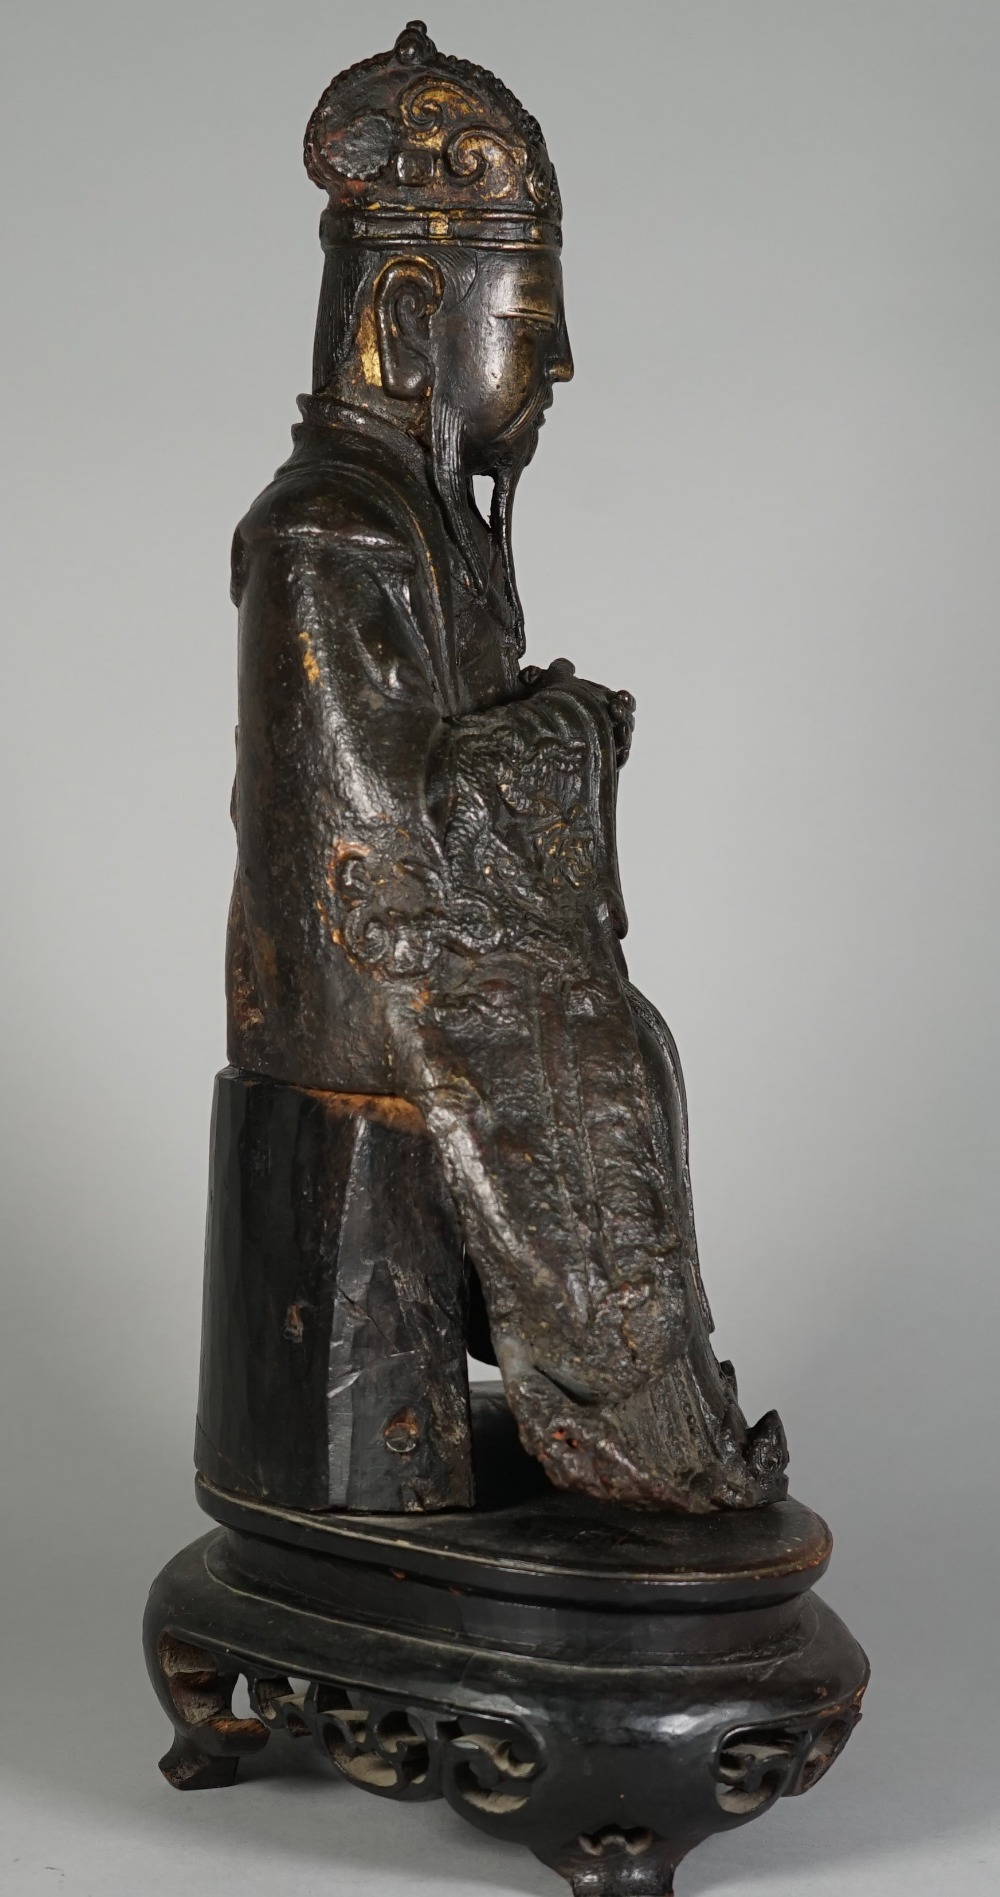 A Chinese bronze figure of a dignitary, Ming dynasty, seated in meditation with hands clasped, - Image 4 of 7